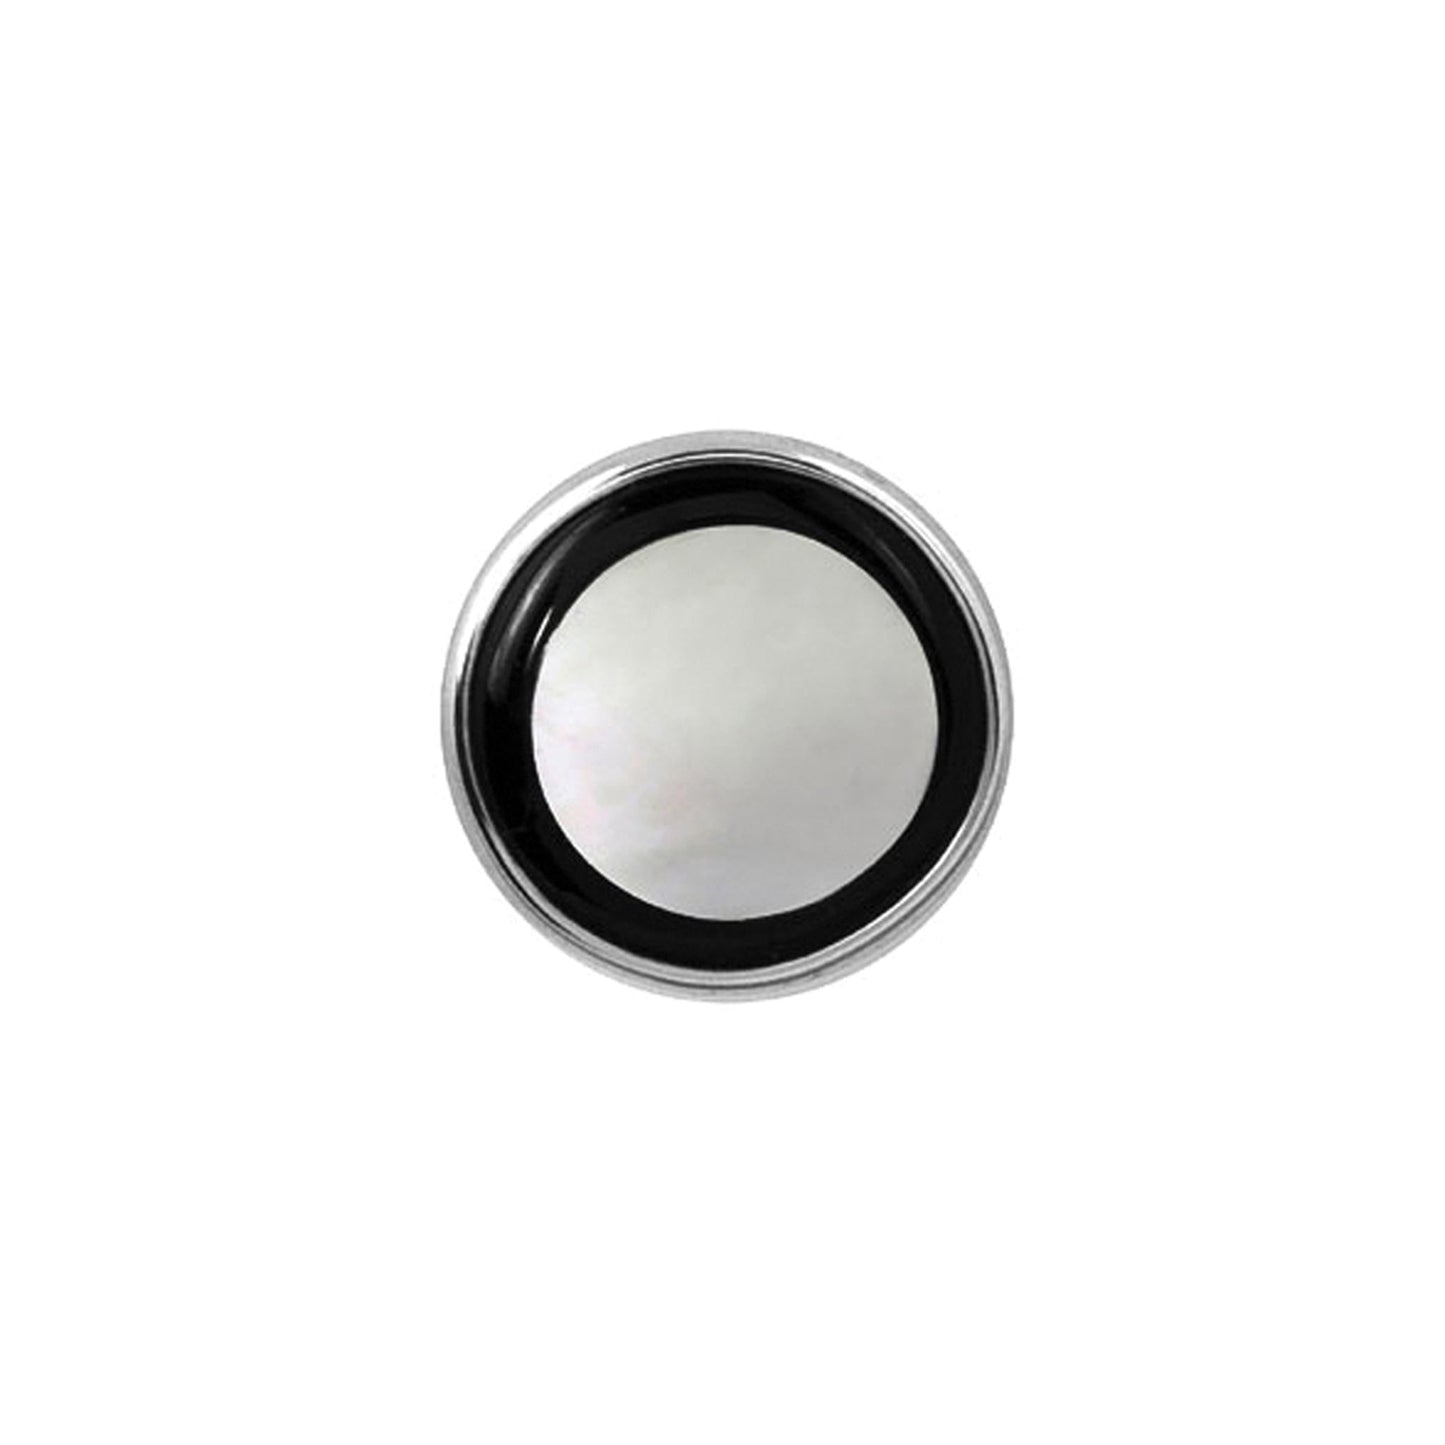 A sterling silver round mother of pearl & onyx tie tack displayed on a neutral white background.